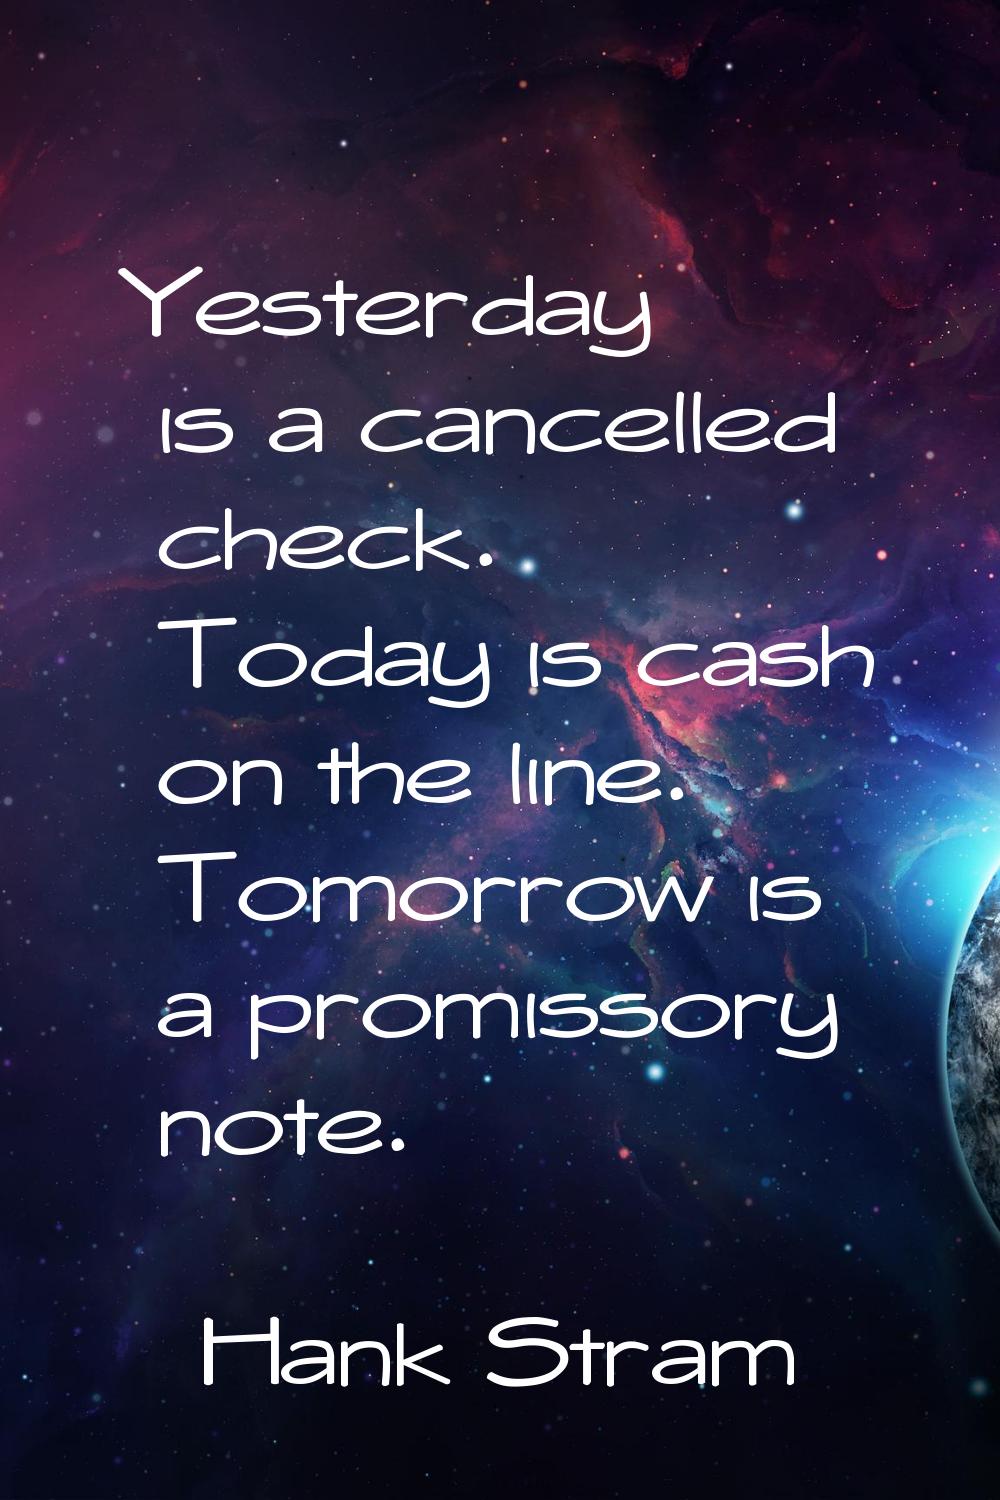 Yesterday is a cancelled check. Today is cash on the line. Tomorrow is a promissory note.